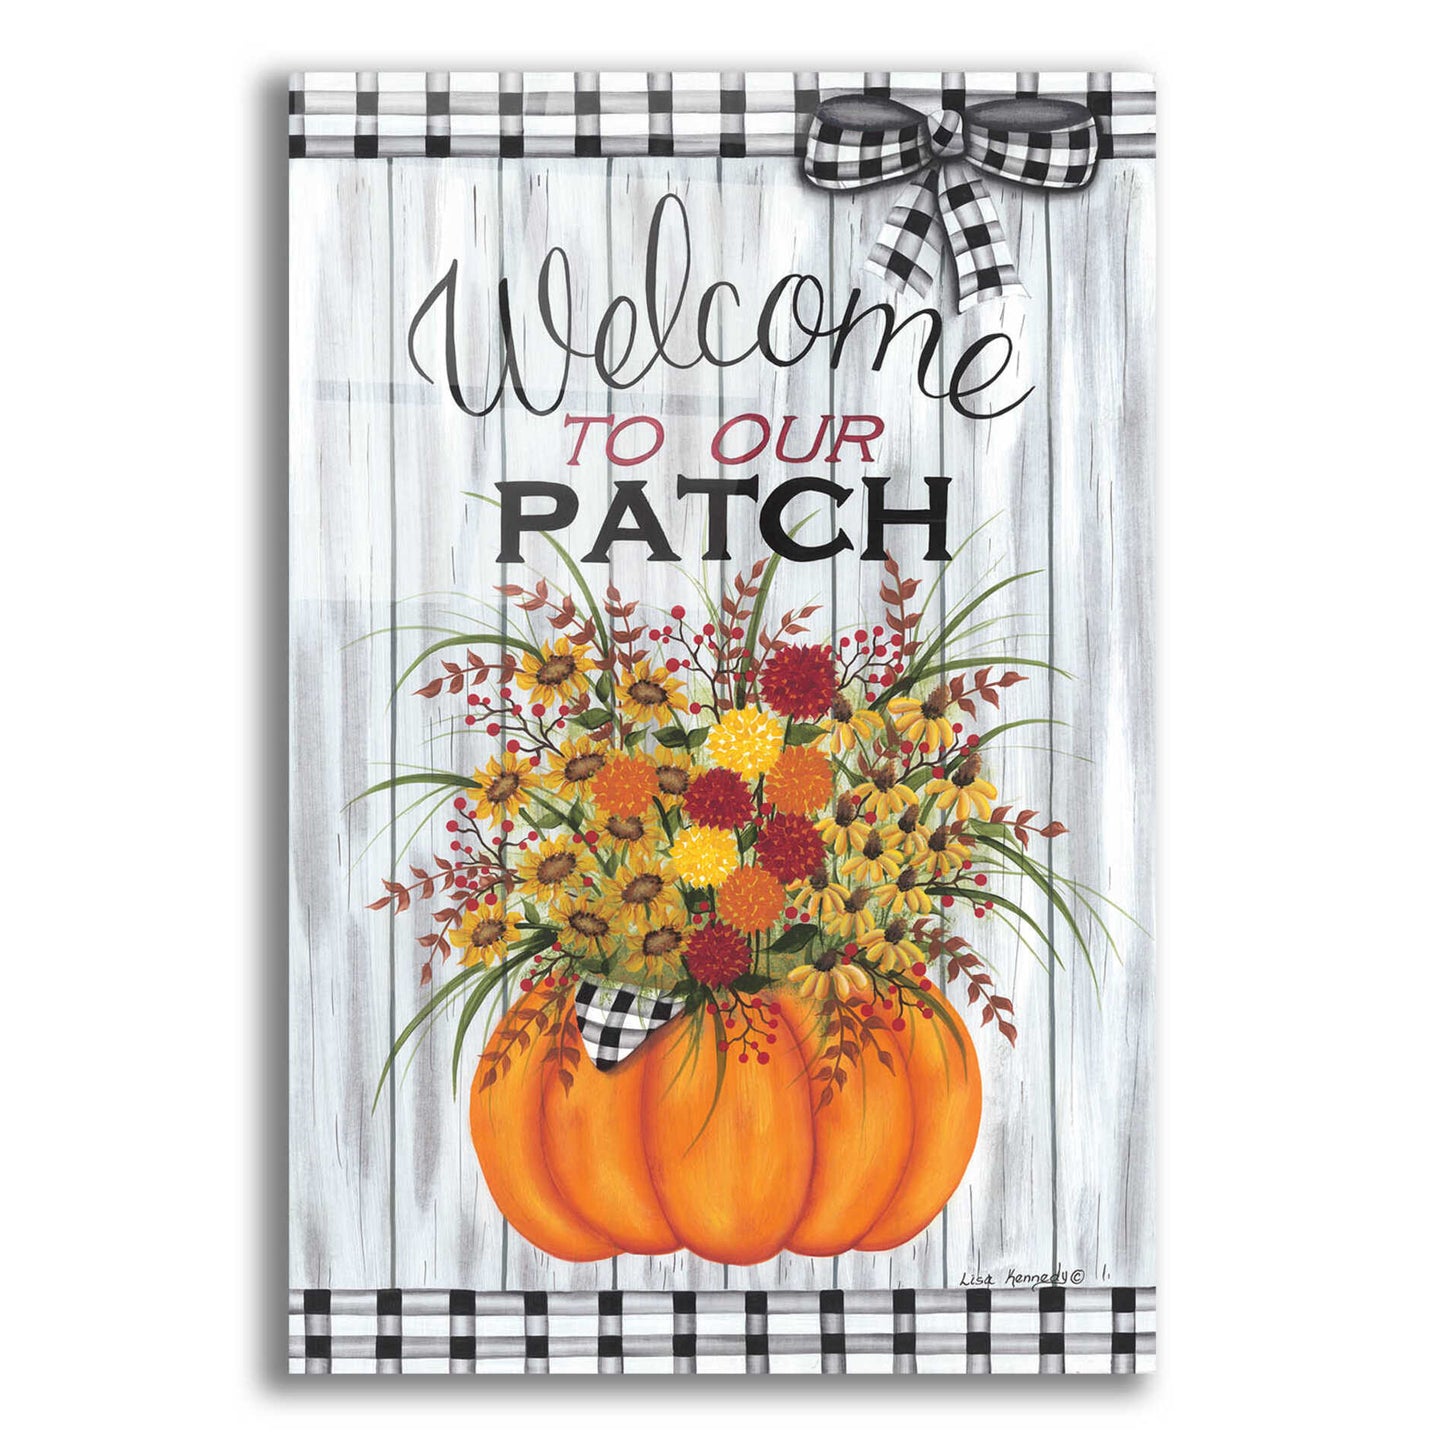 Epic Art 'Welcome to Our Patch' by Lisa Kennedy, Acrylic Glass Wall Art,16x24